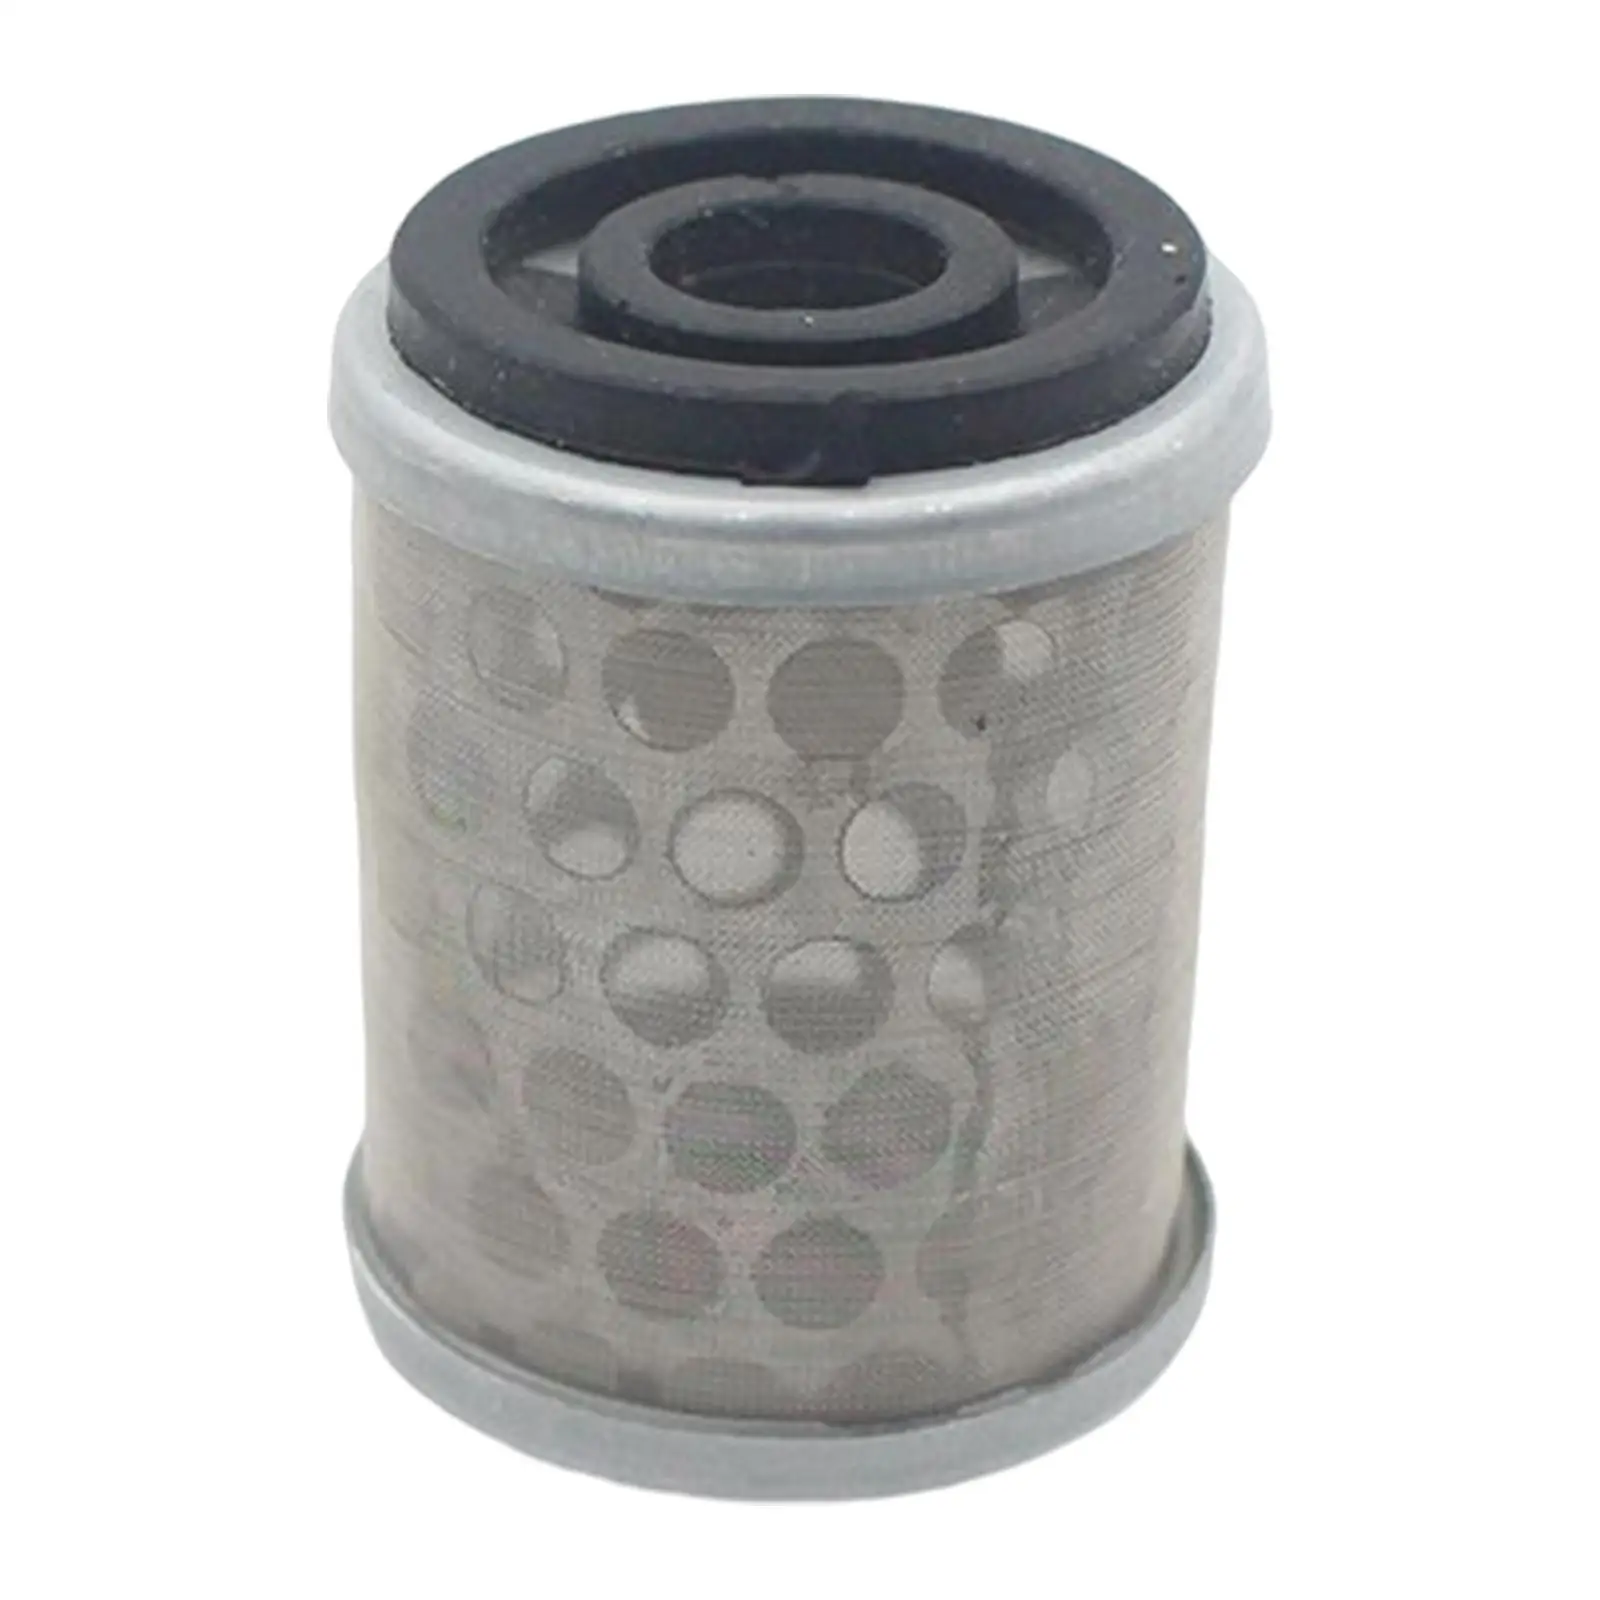 Motorcycle Oil Filter HF141 for Yamaha Czd300 Accessories Spare Parts